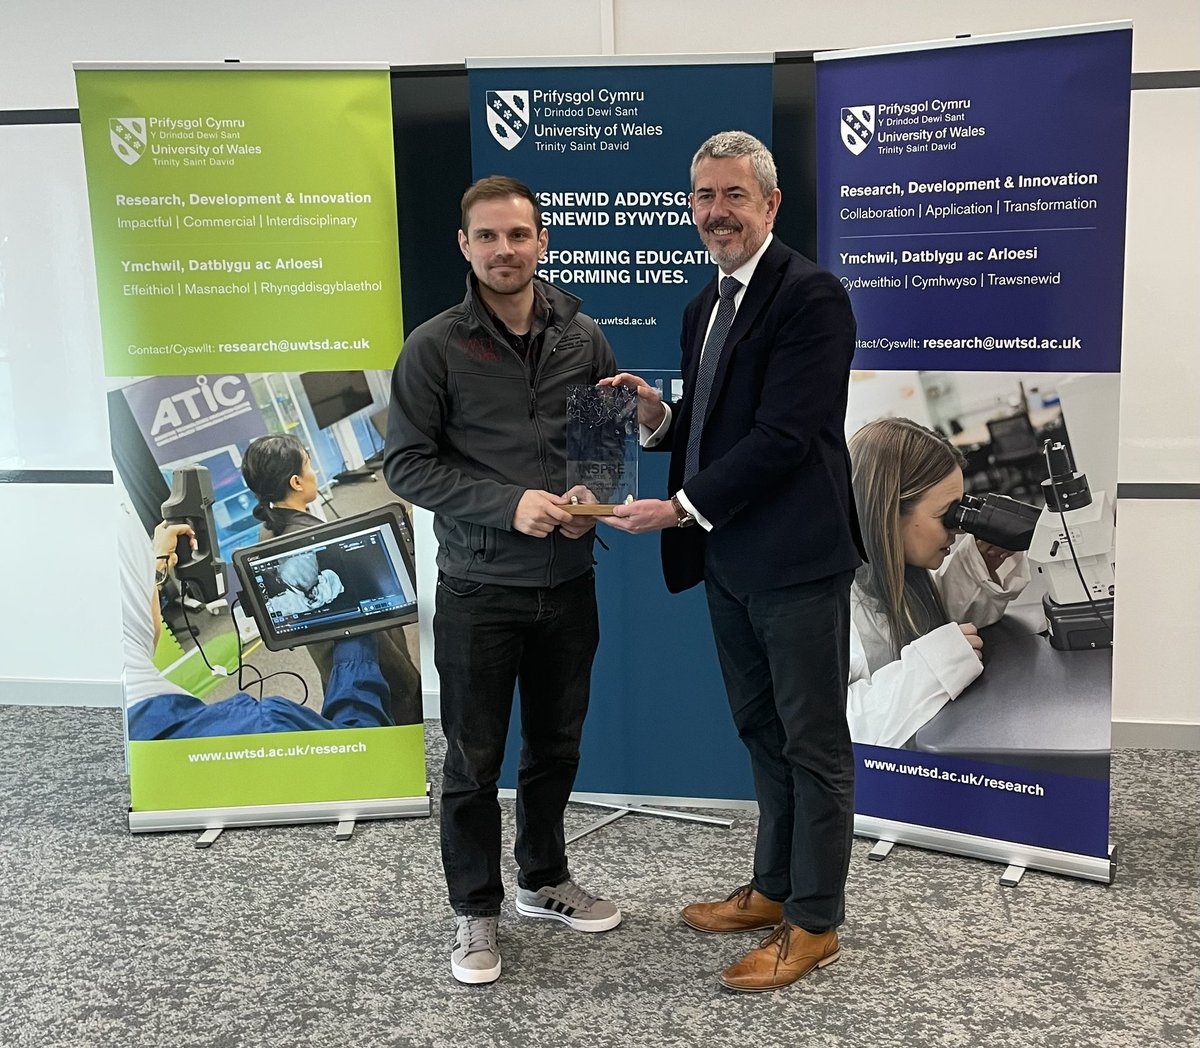 Congratulations to Glyn Jenkins and the @MADECymru team on winning the Best Interdisciplinary #Collaboration category in the UWTSD Inspire Awards today.   #Research #Innovation #Enterprise   @UWTSD_Inspire